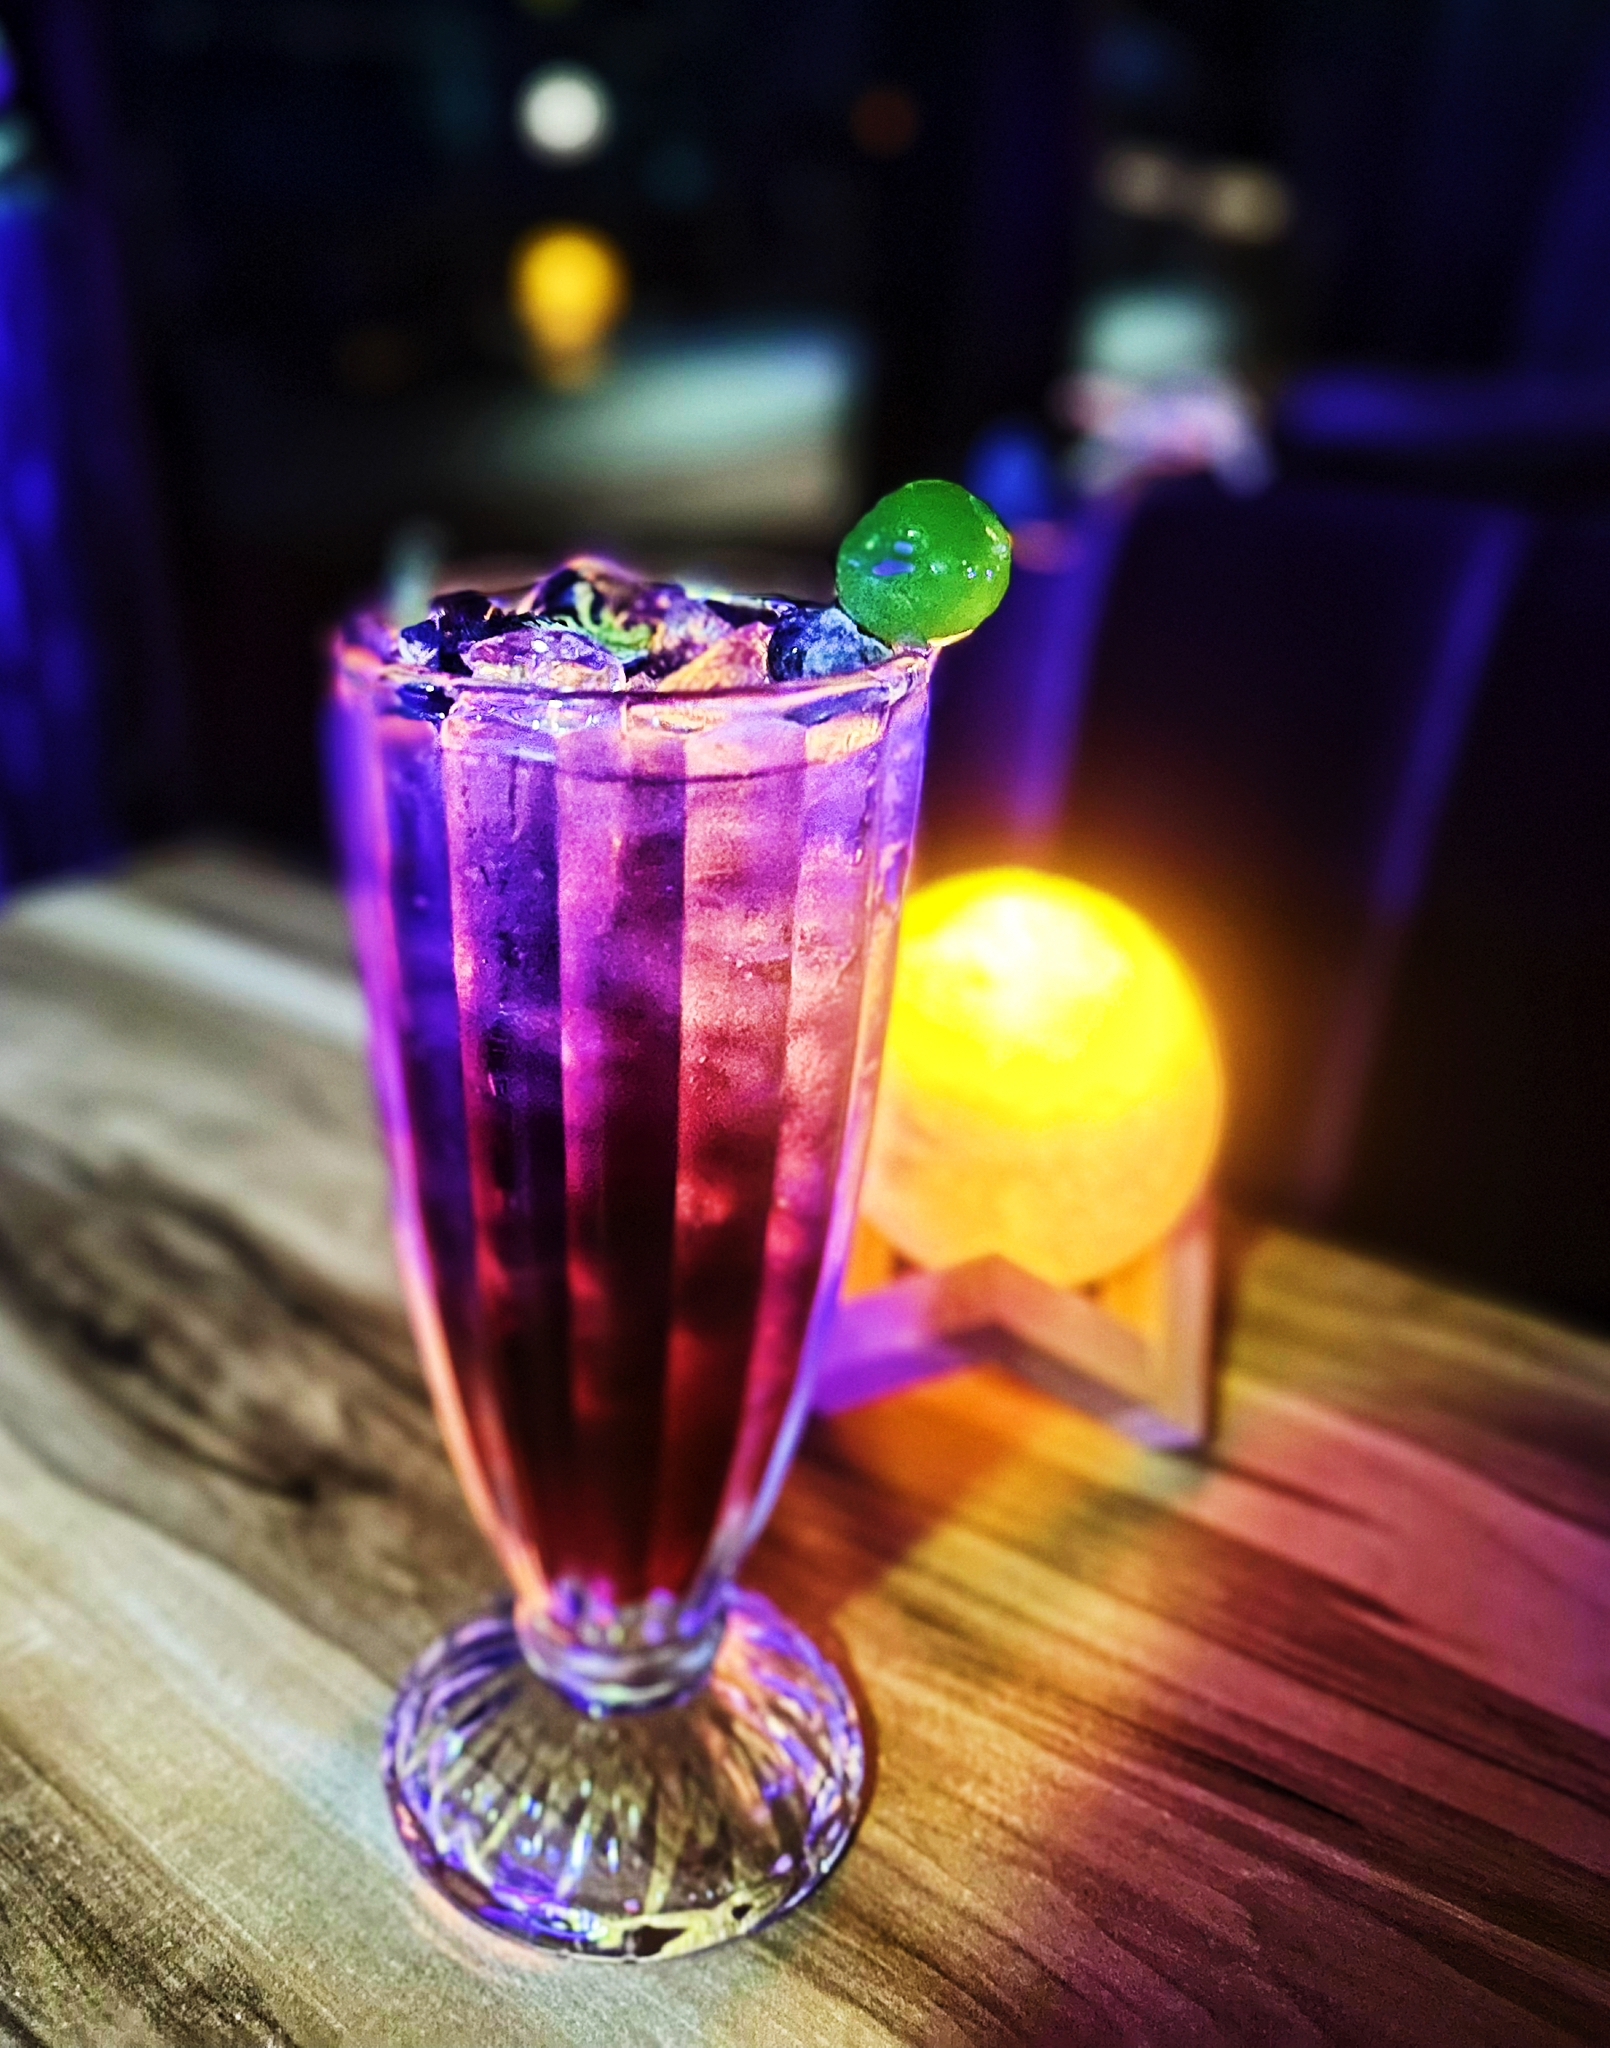 Singapore’s Moon Themed Rooftop Bar Drinks